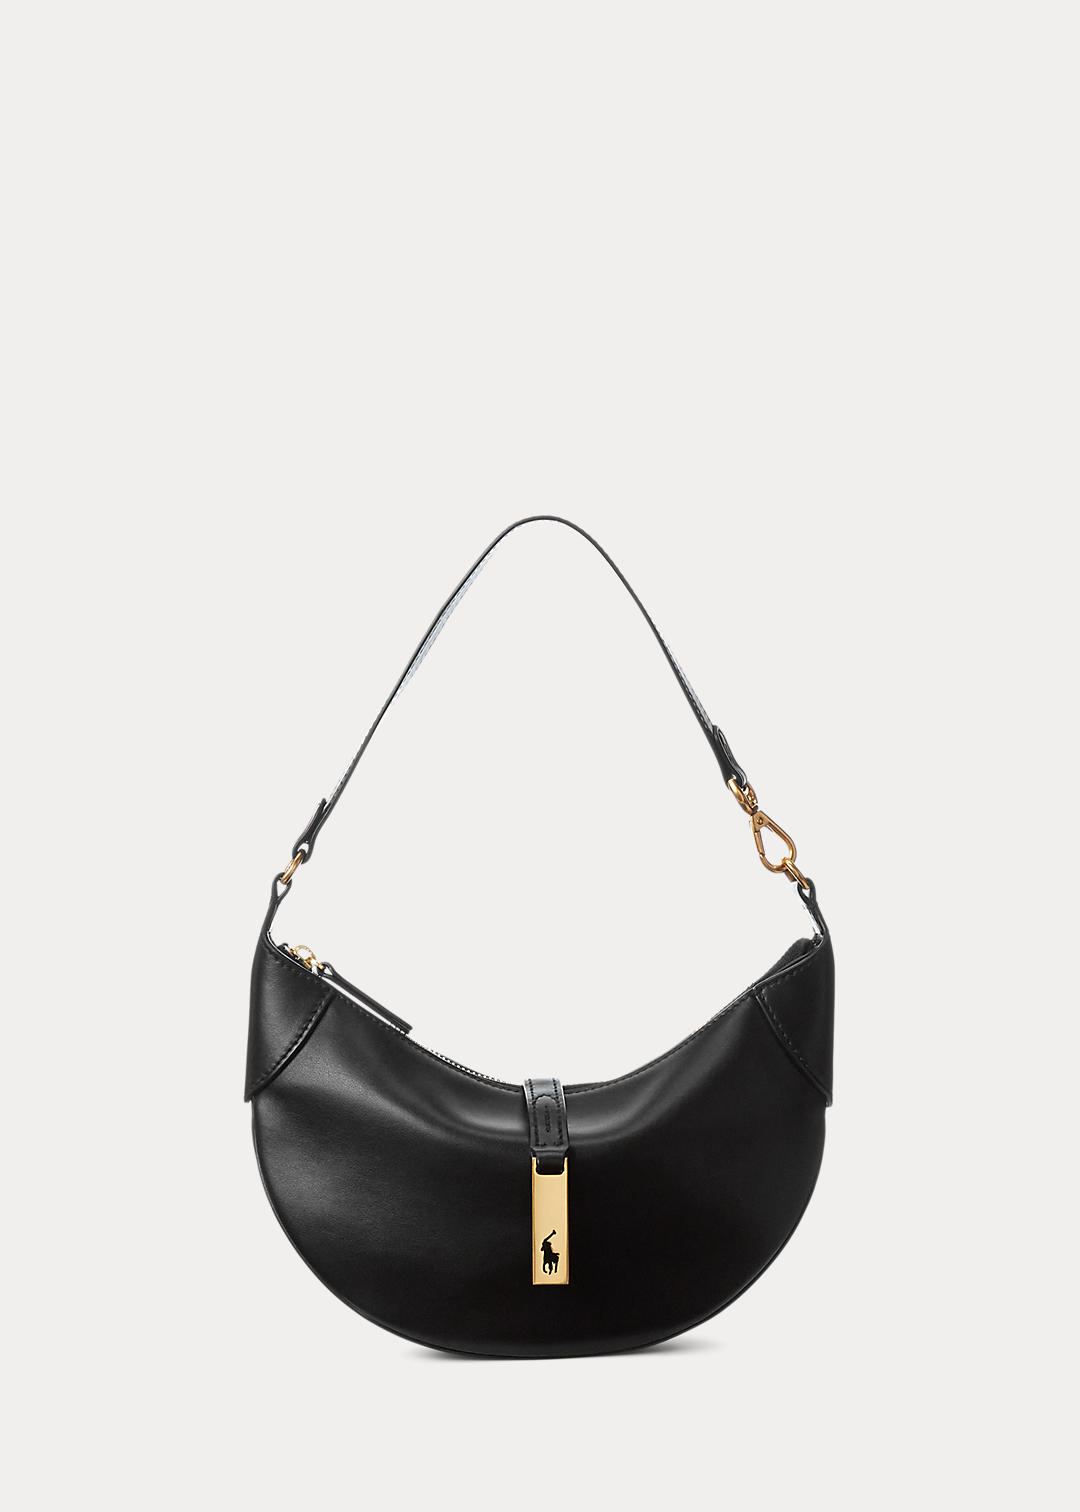 High quality everyday leather bag, from Paris rue Saint-Honoré